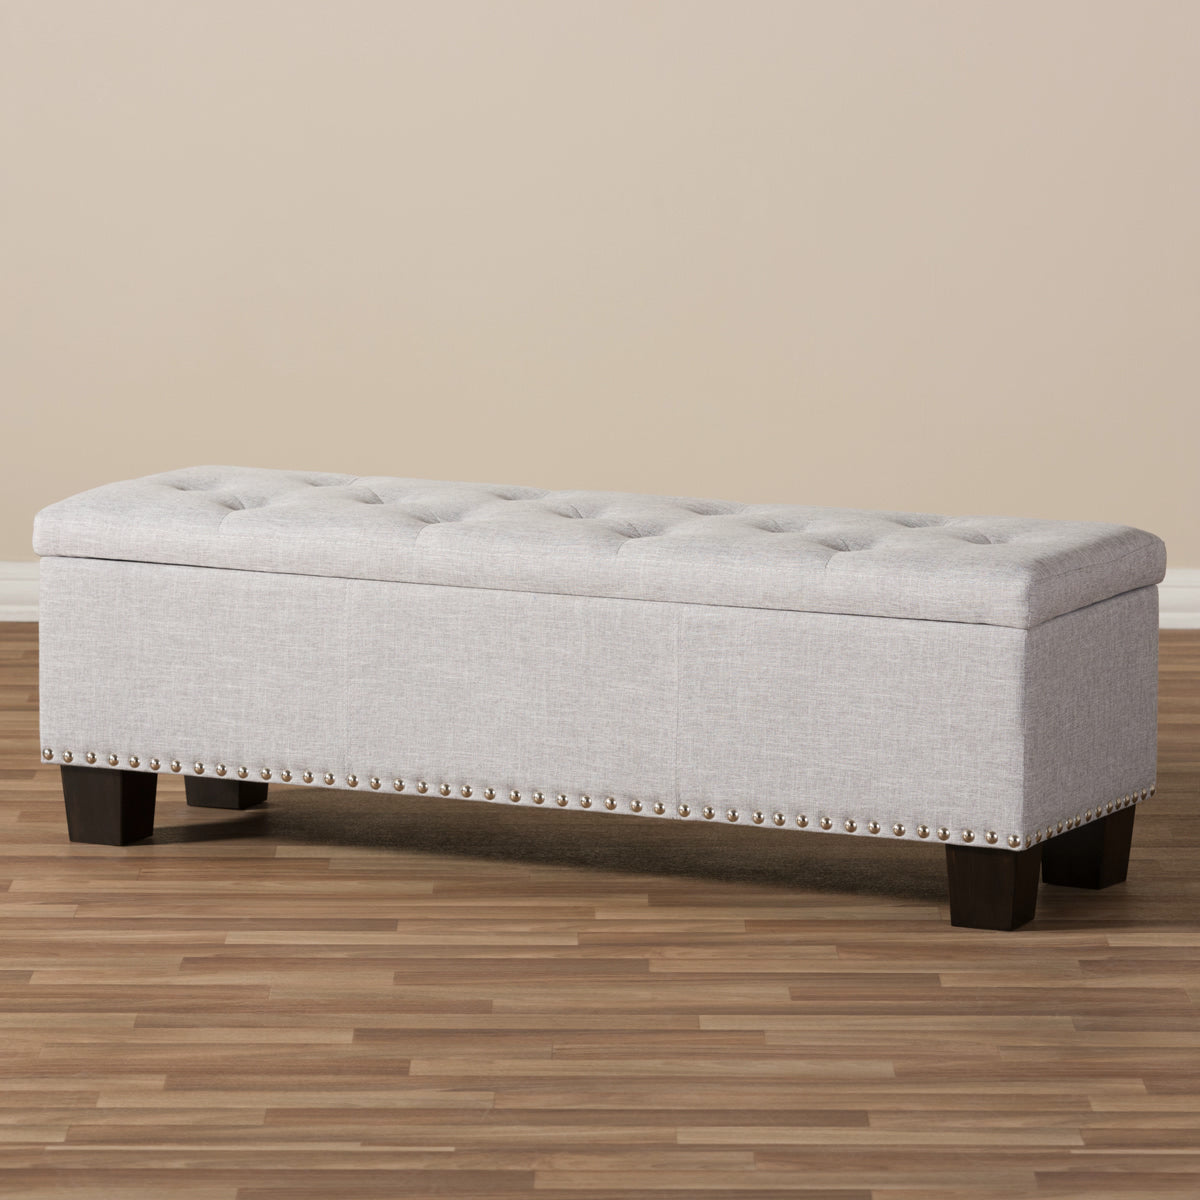 Baxton Studio Hannah Modern and Contemporary Grayish Beige Fabric Upholstered Button-Tufting Storage Ottoman Bench Baxton Studio-benches-Minimal And Modern - 10